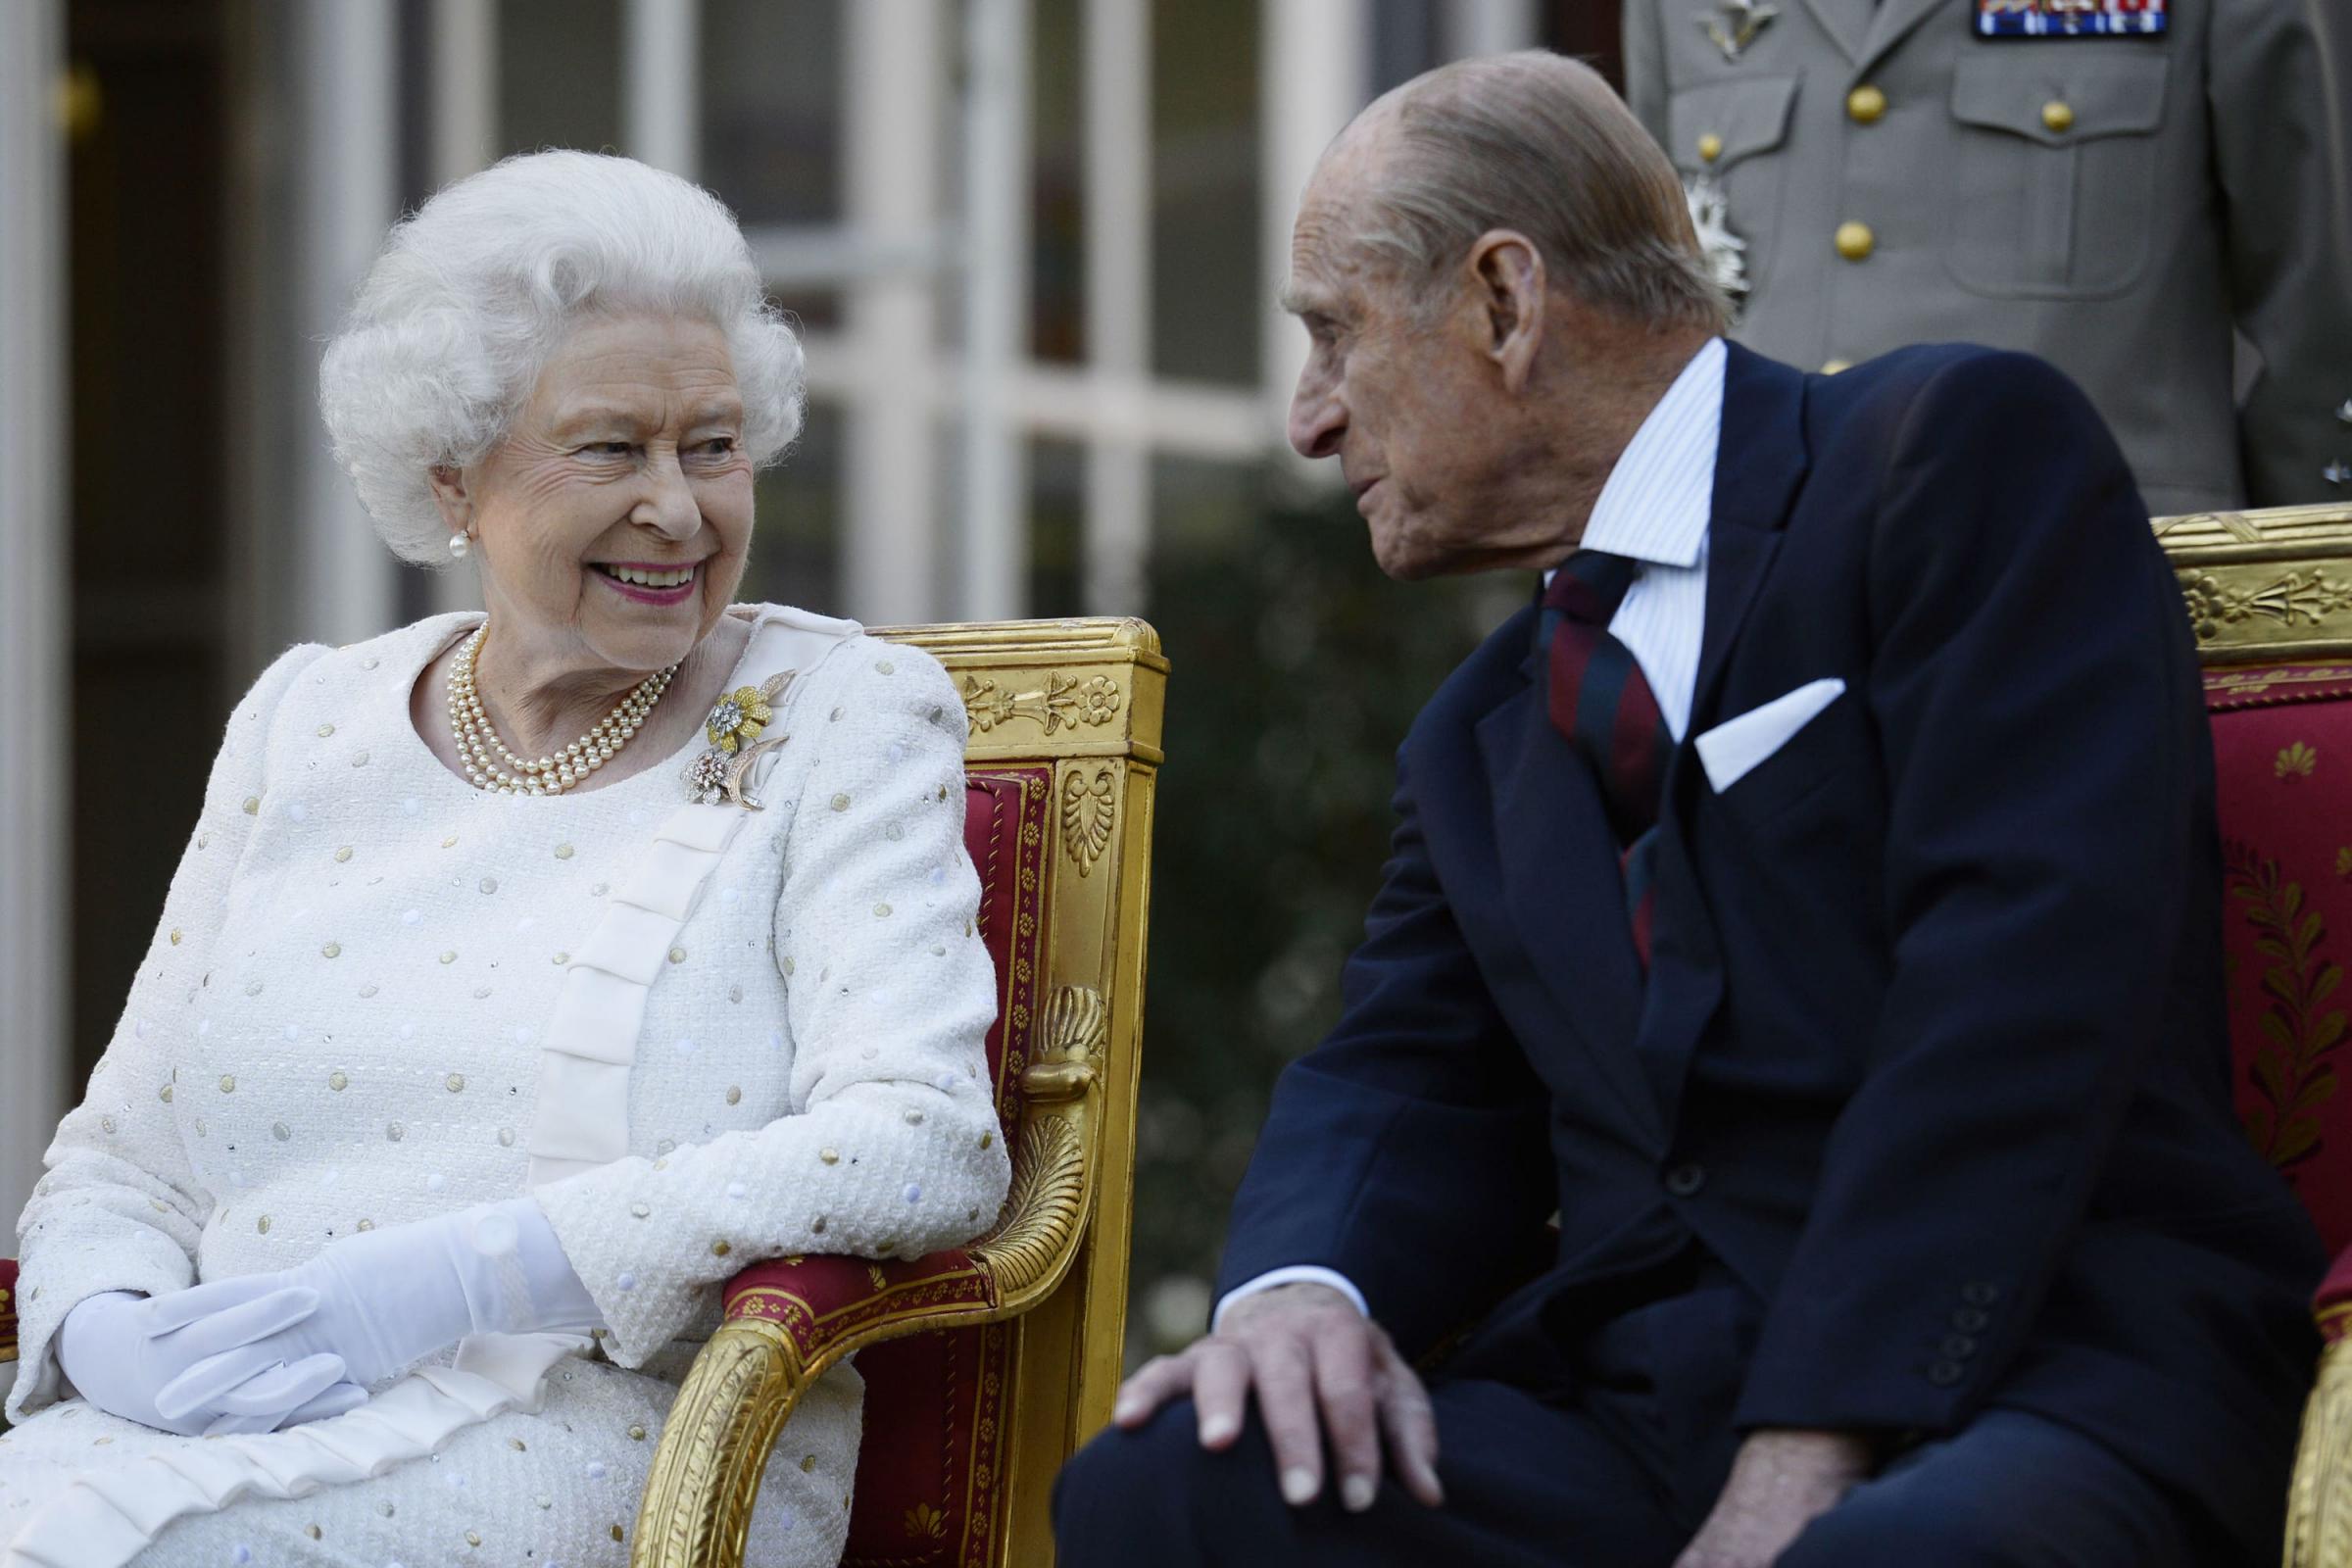 Who's who on the guest list for the Duke of Edinburgh's funeral?